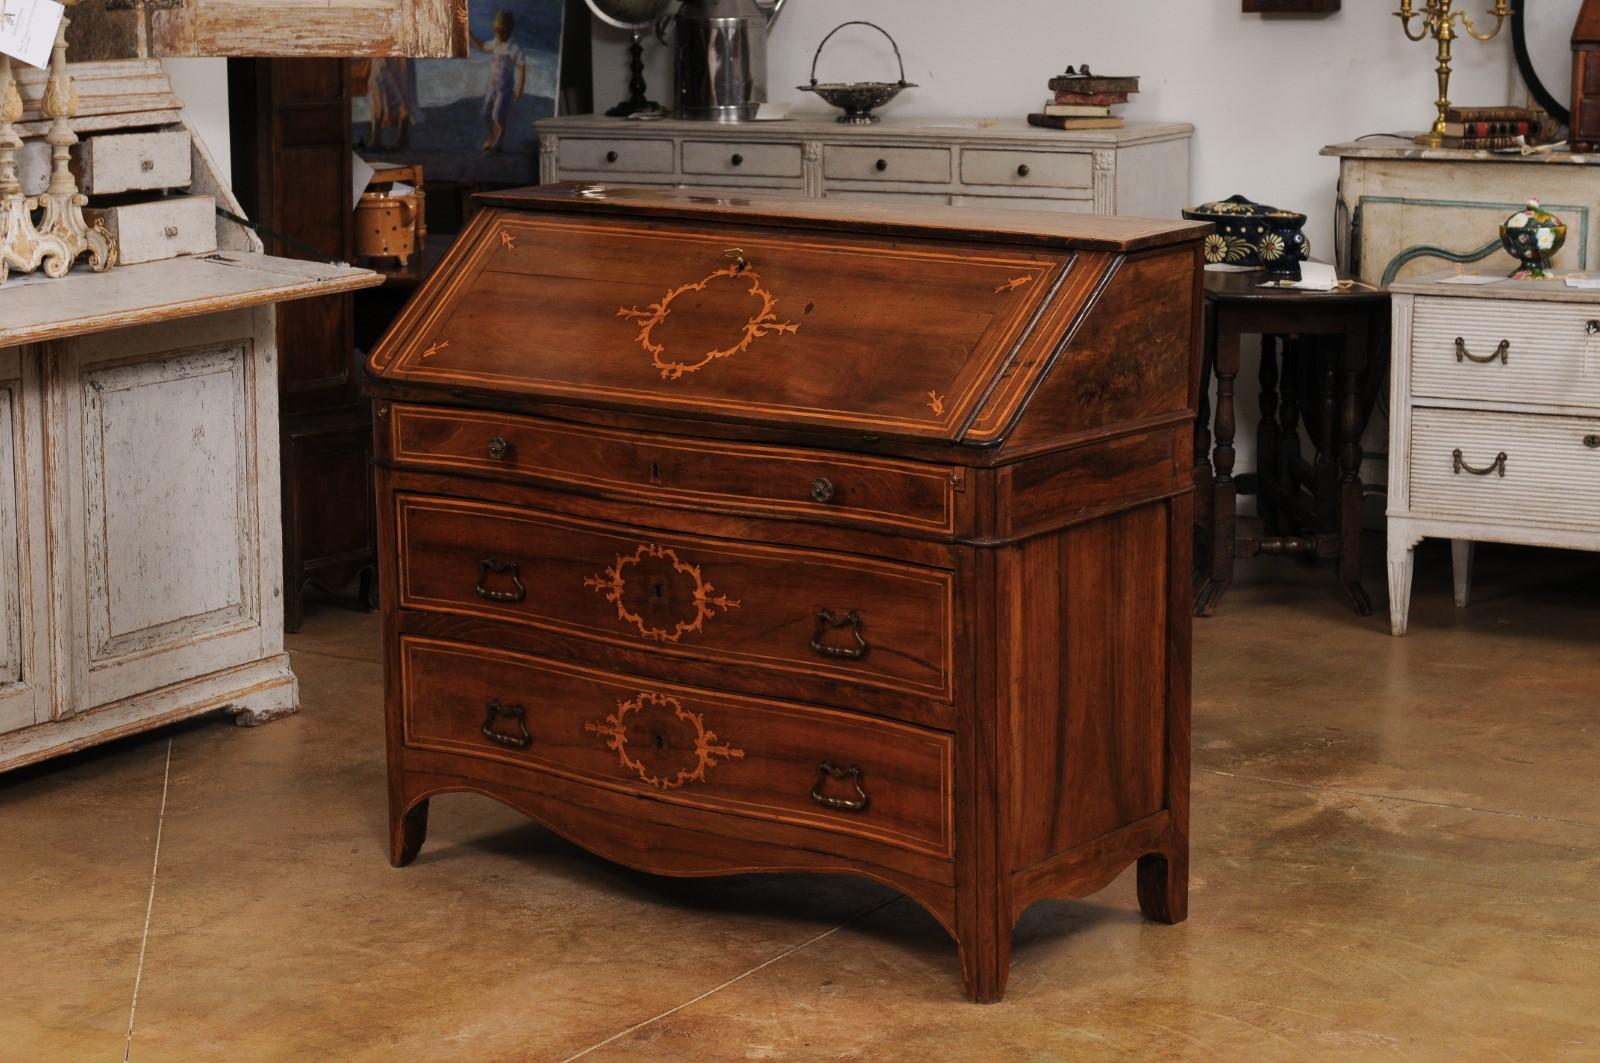 Italian 1820s Walnut and Maple Slant Front Desk with Floral Marquetry 9